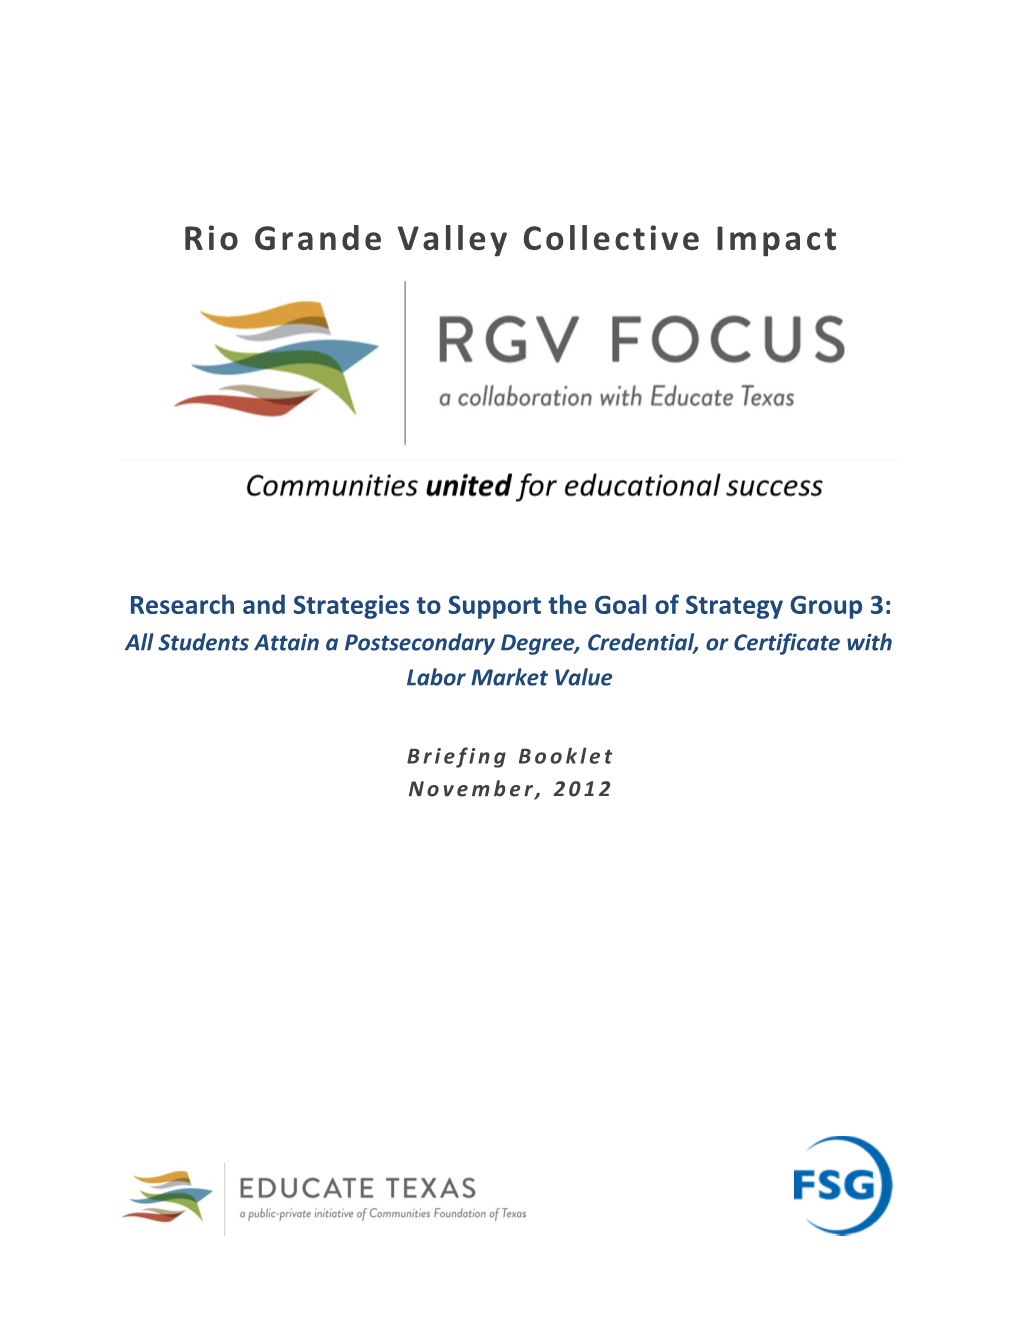 Rio Grande Valley Collective Impact Strategy Group 3 Strategies and Best Practices